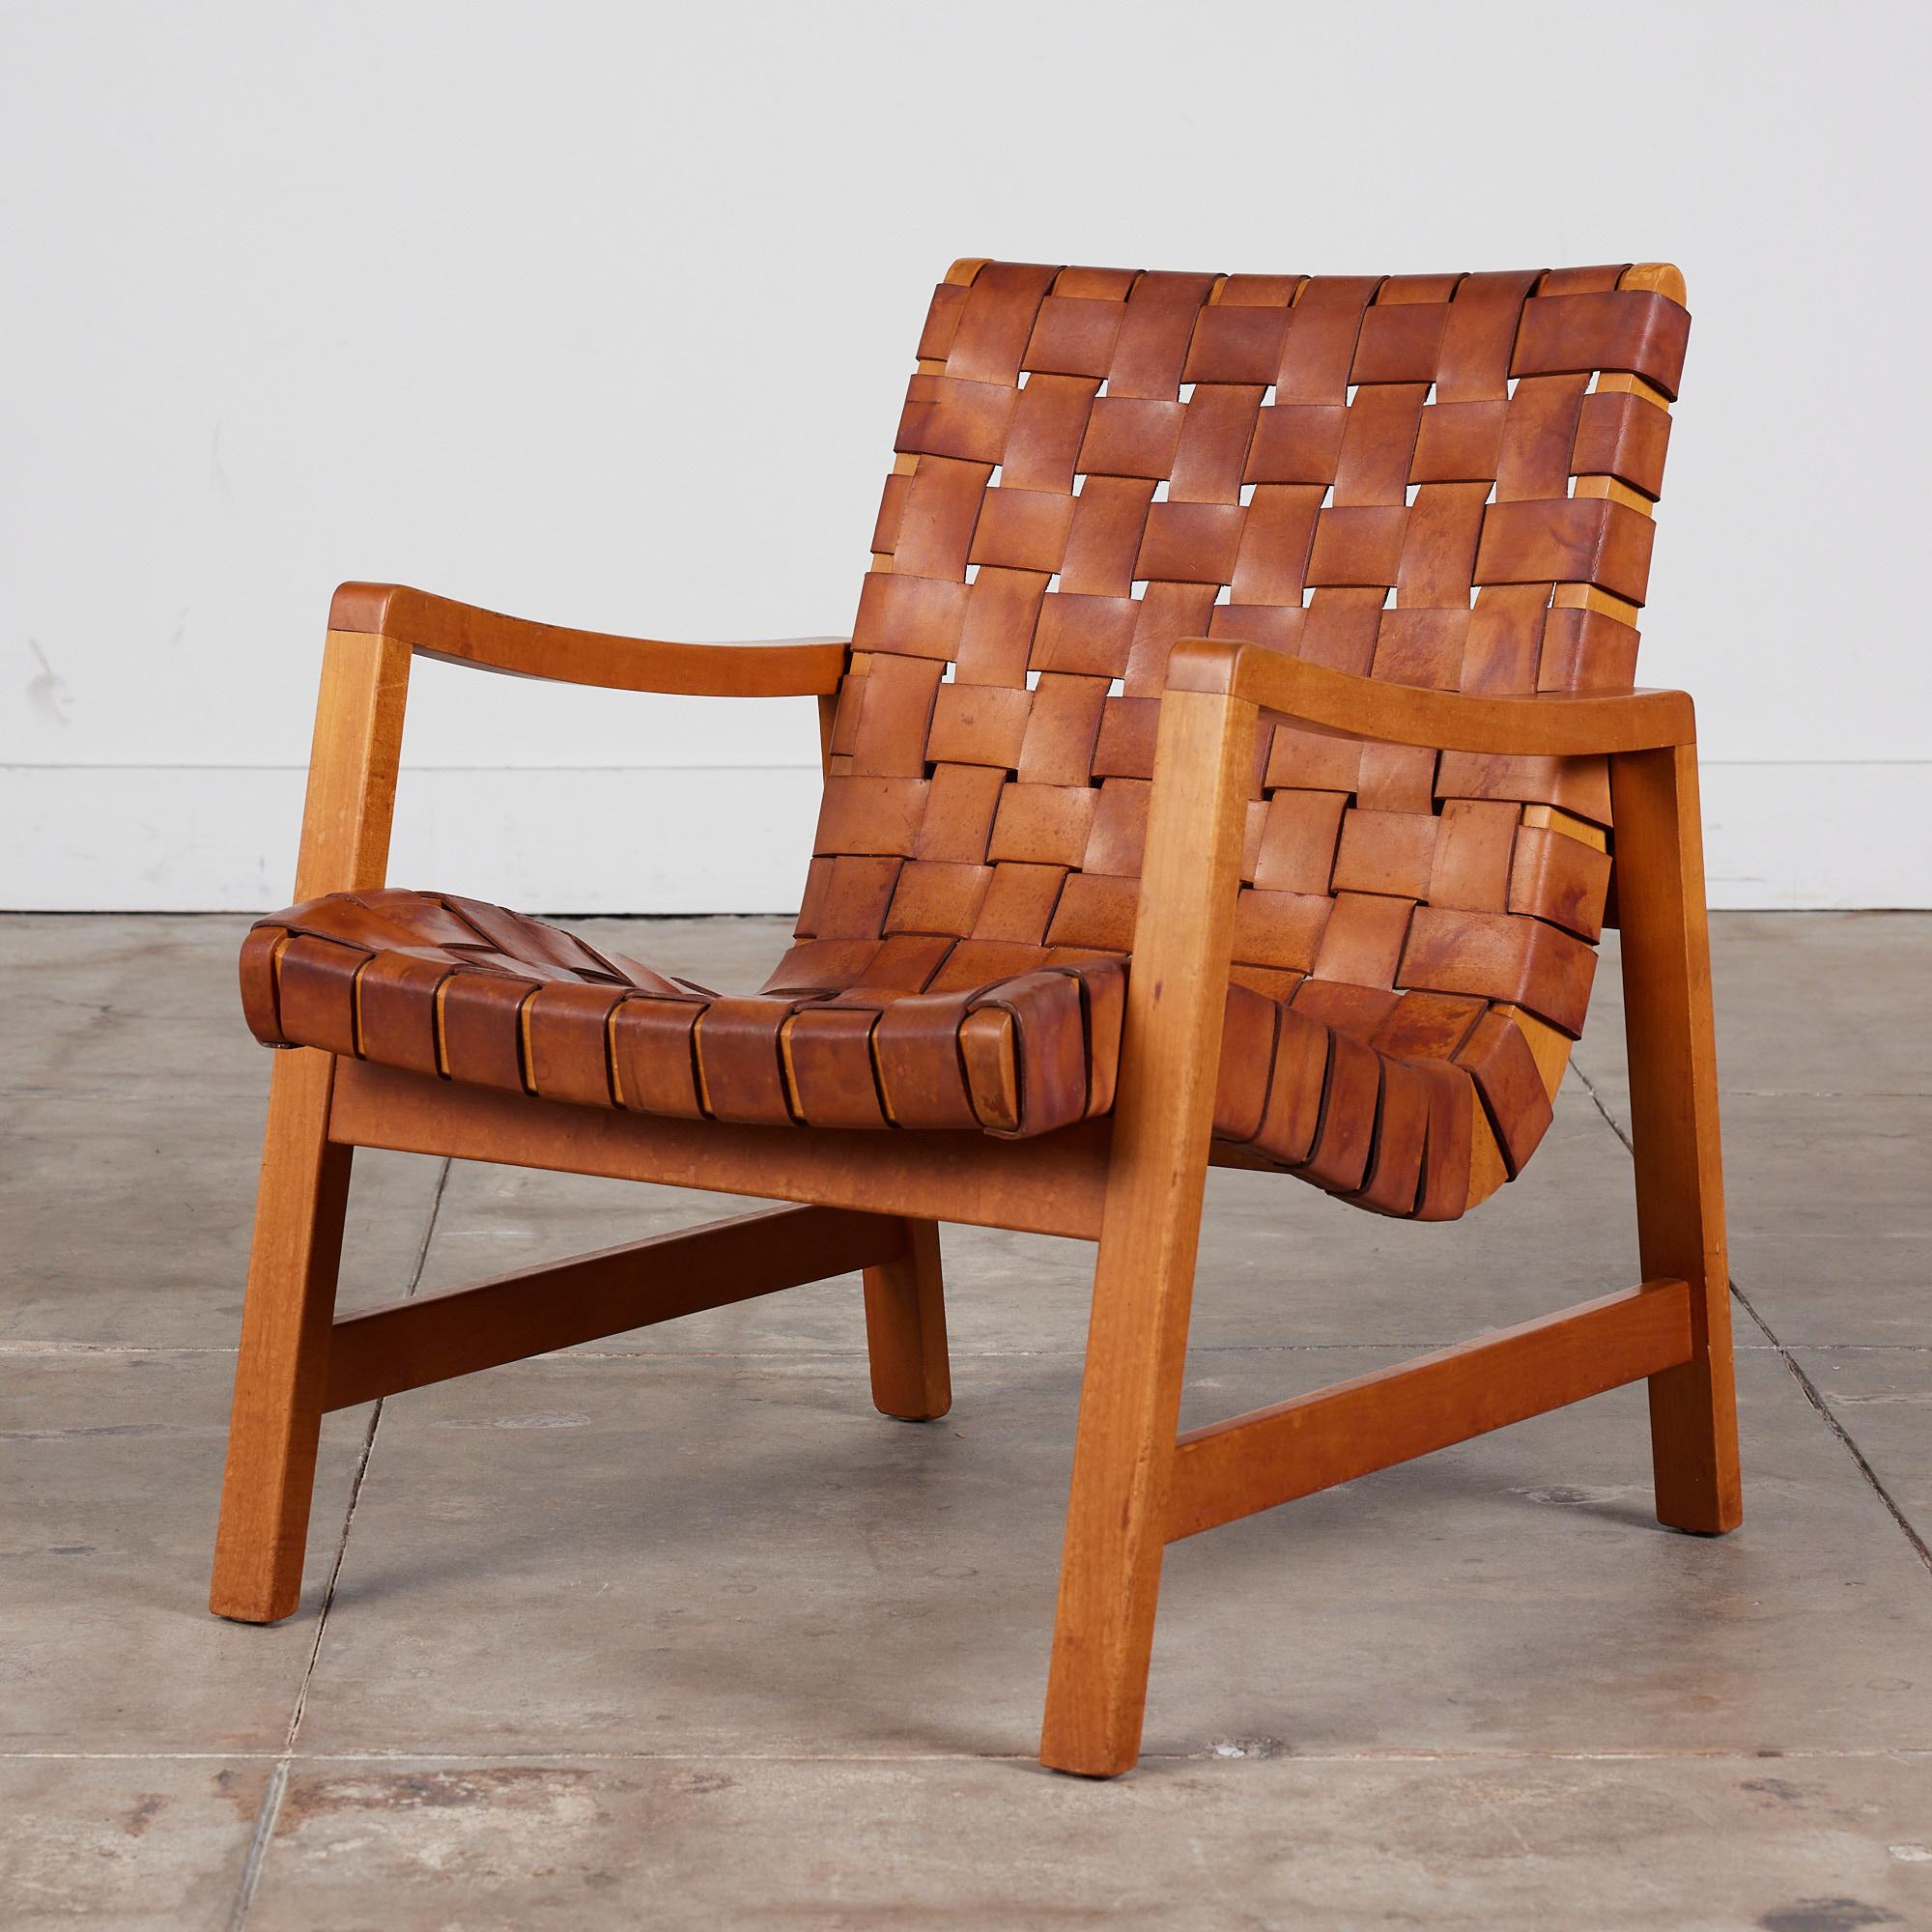 Lounge chair by Jens Risom for Knoll, circa 1940s. This 1943 design was Risom's first design for Knoll, where he had been brought on as design director. This piece features a birch frame, original brown leather webbing and steel nail head details